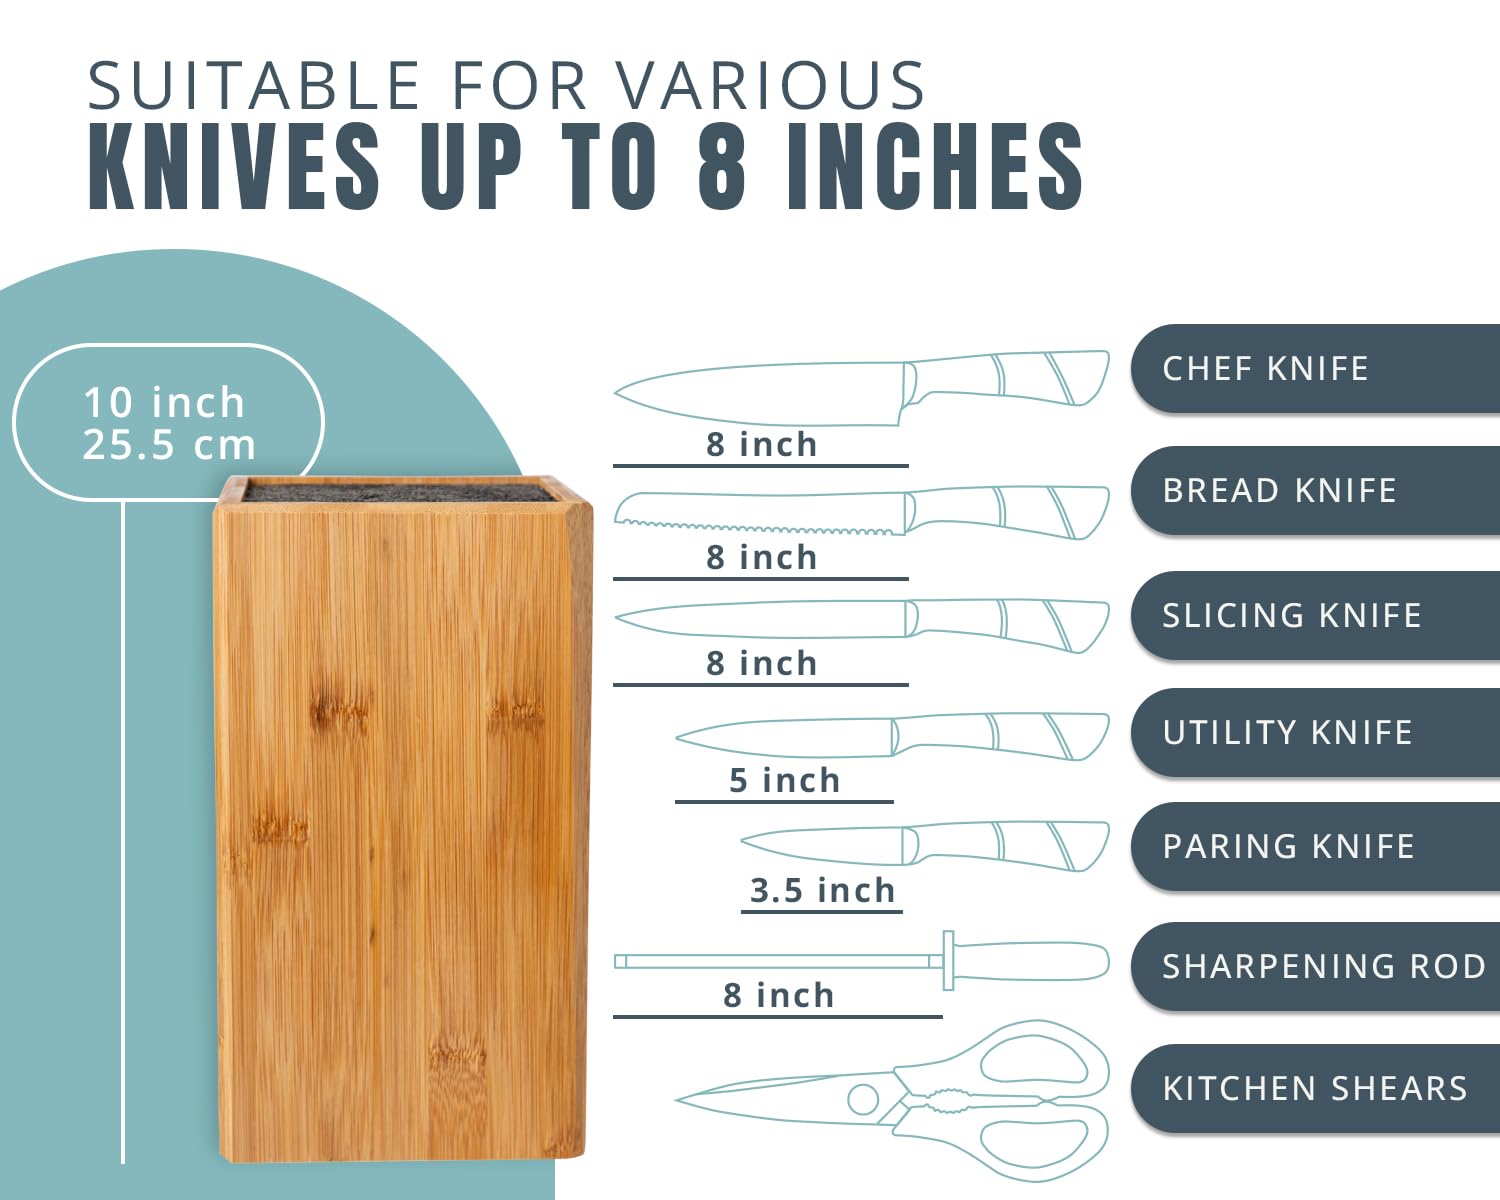 XL Large Universal Knife Block without Knives - Bamboo Countertop Knife Holder w/Removable Bristles - Convenient & Versatile for Any Knife Size